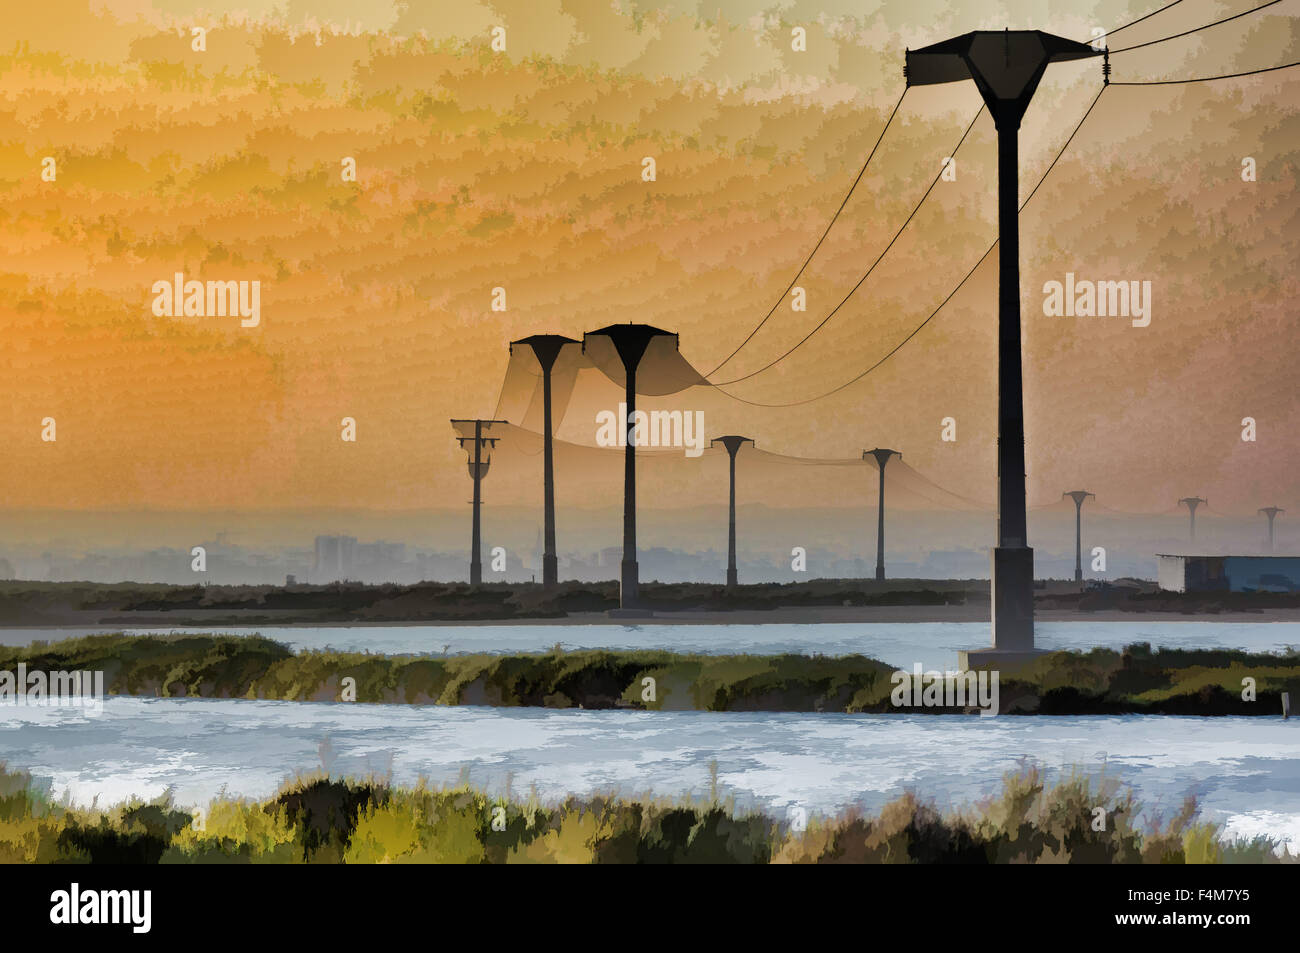 Abstract electricity transmission by towers Stock Photo